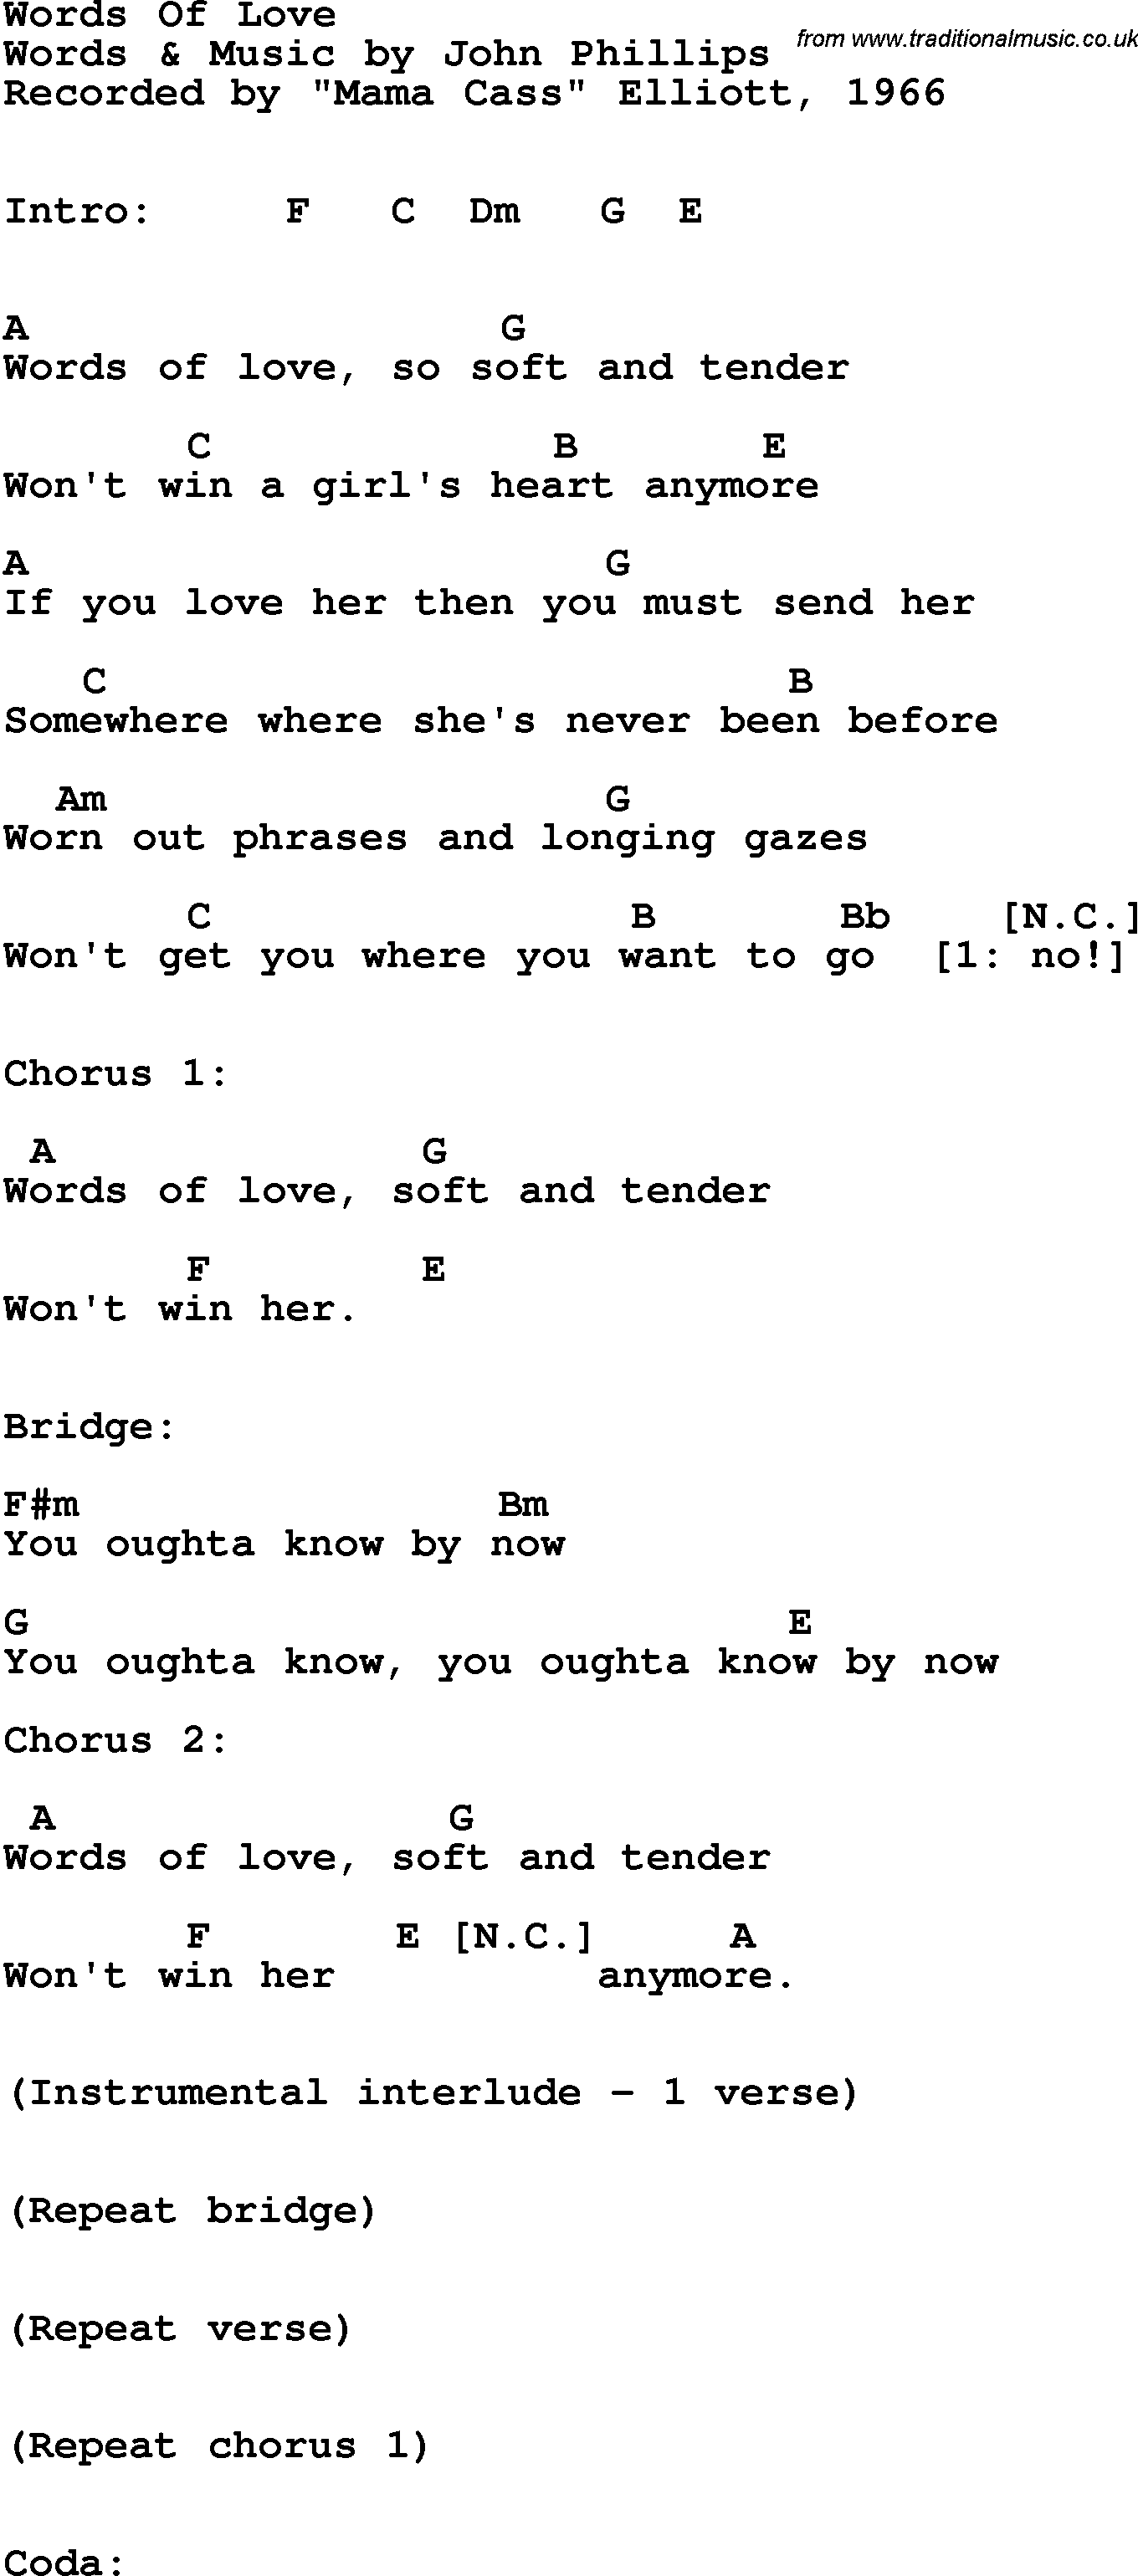 Song Lyrics with guitar chords for Words Of Love - Mama Cass Elliott, 1966